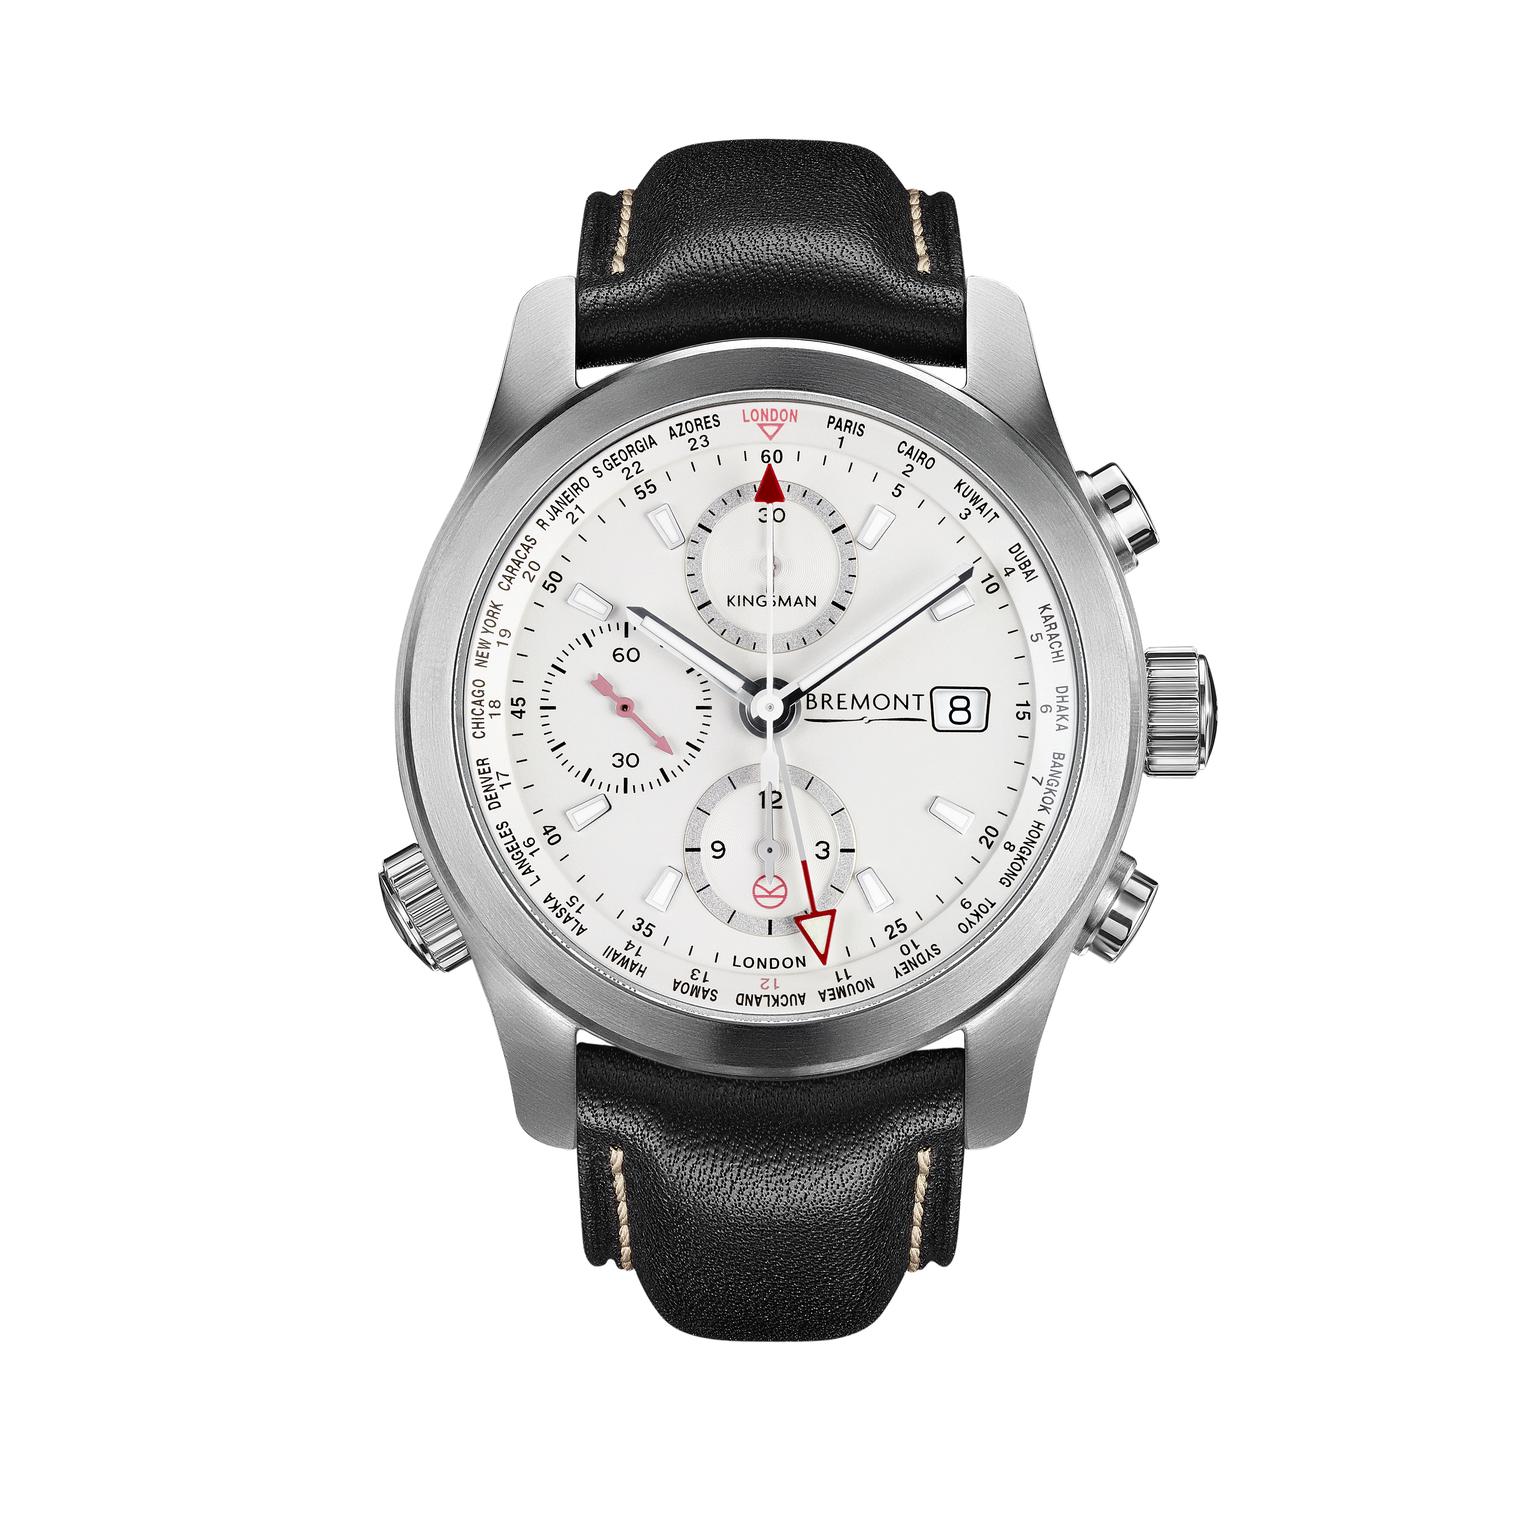 Bremont Kingsman Special Edition chronograph World Timer watch in stainless steel.